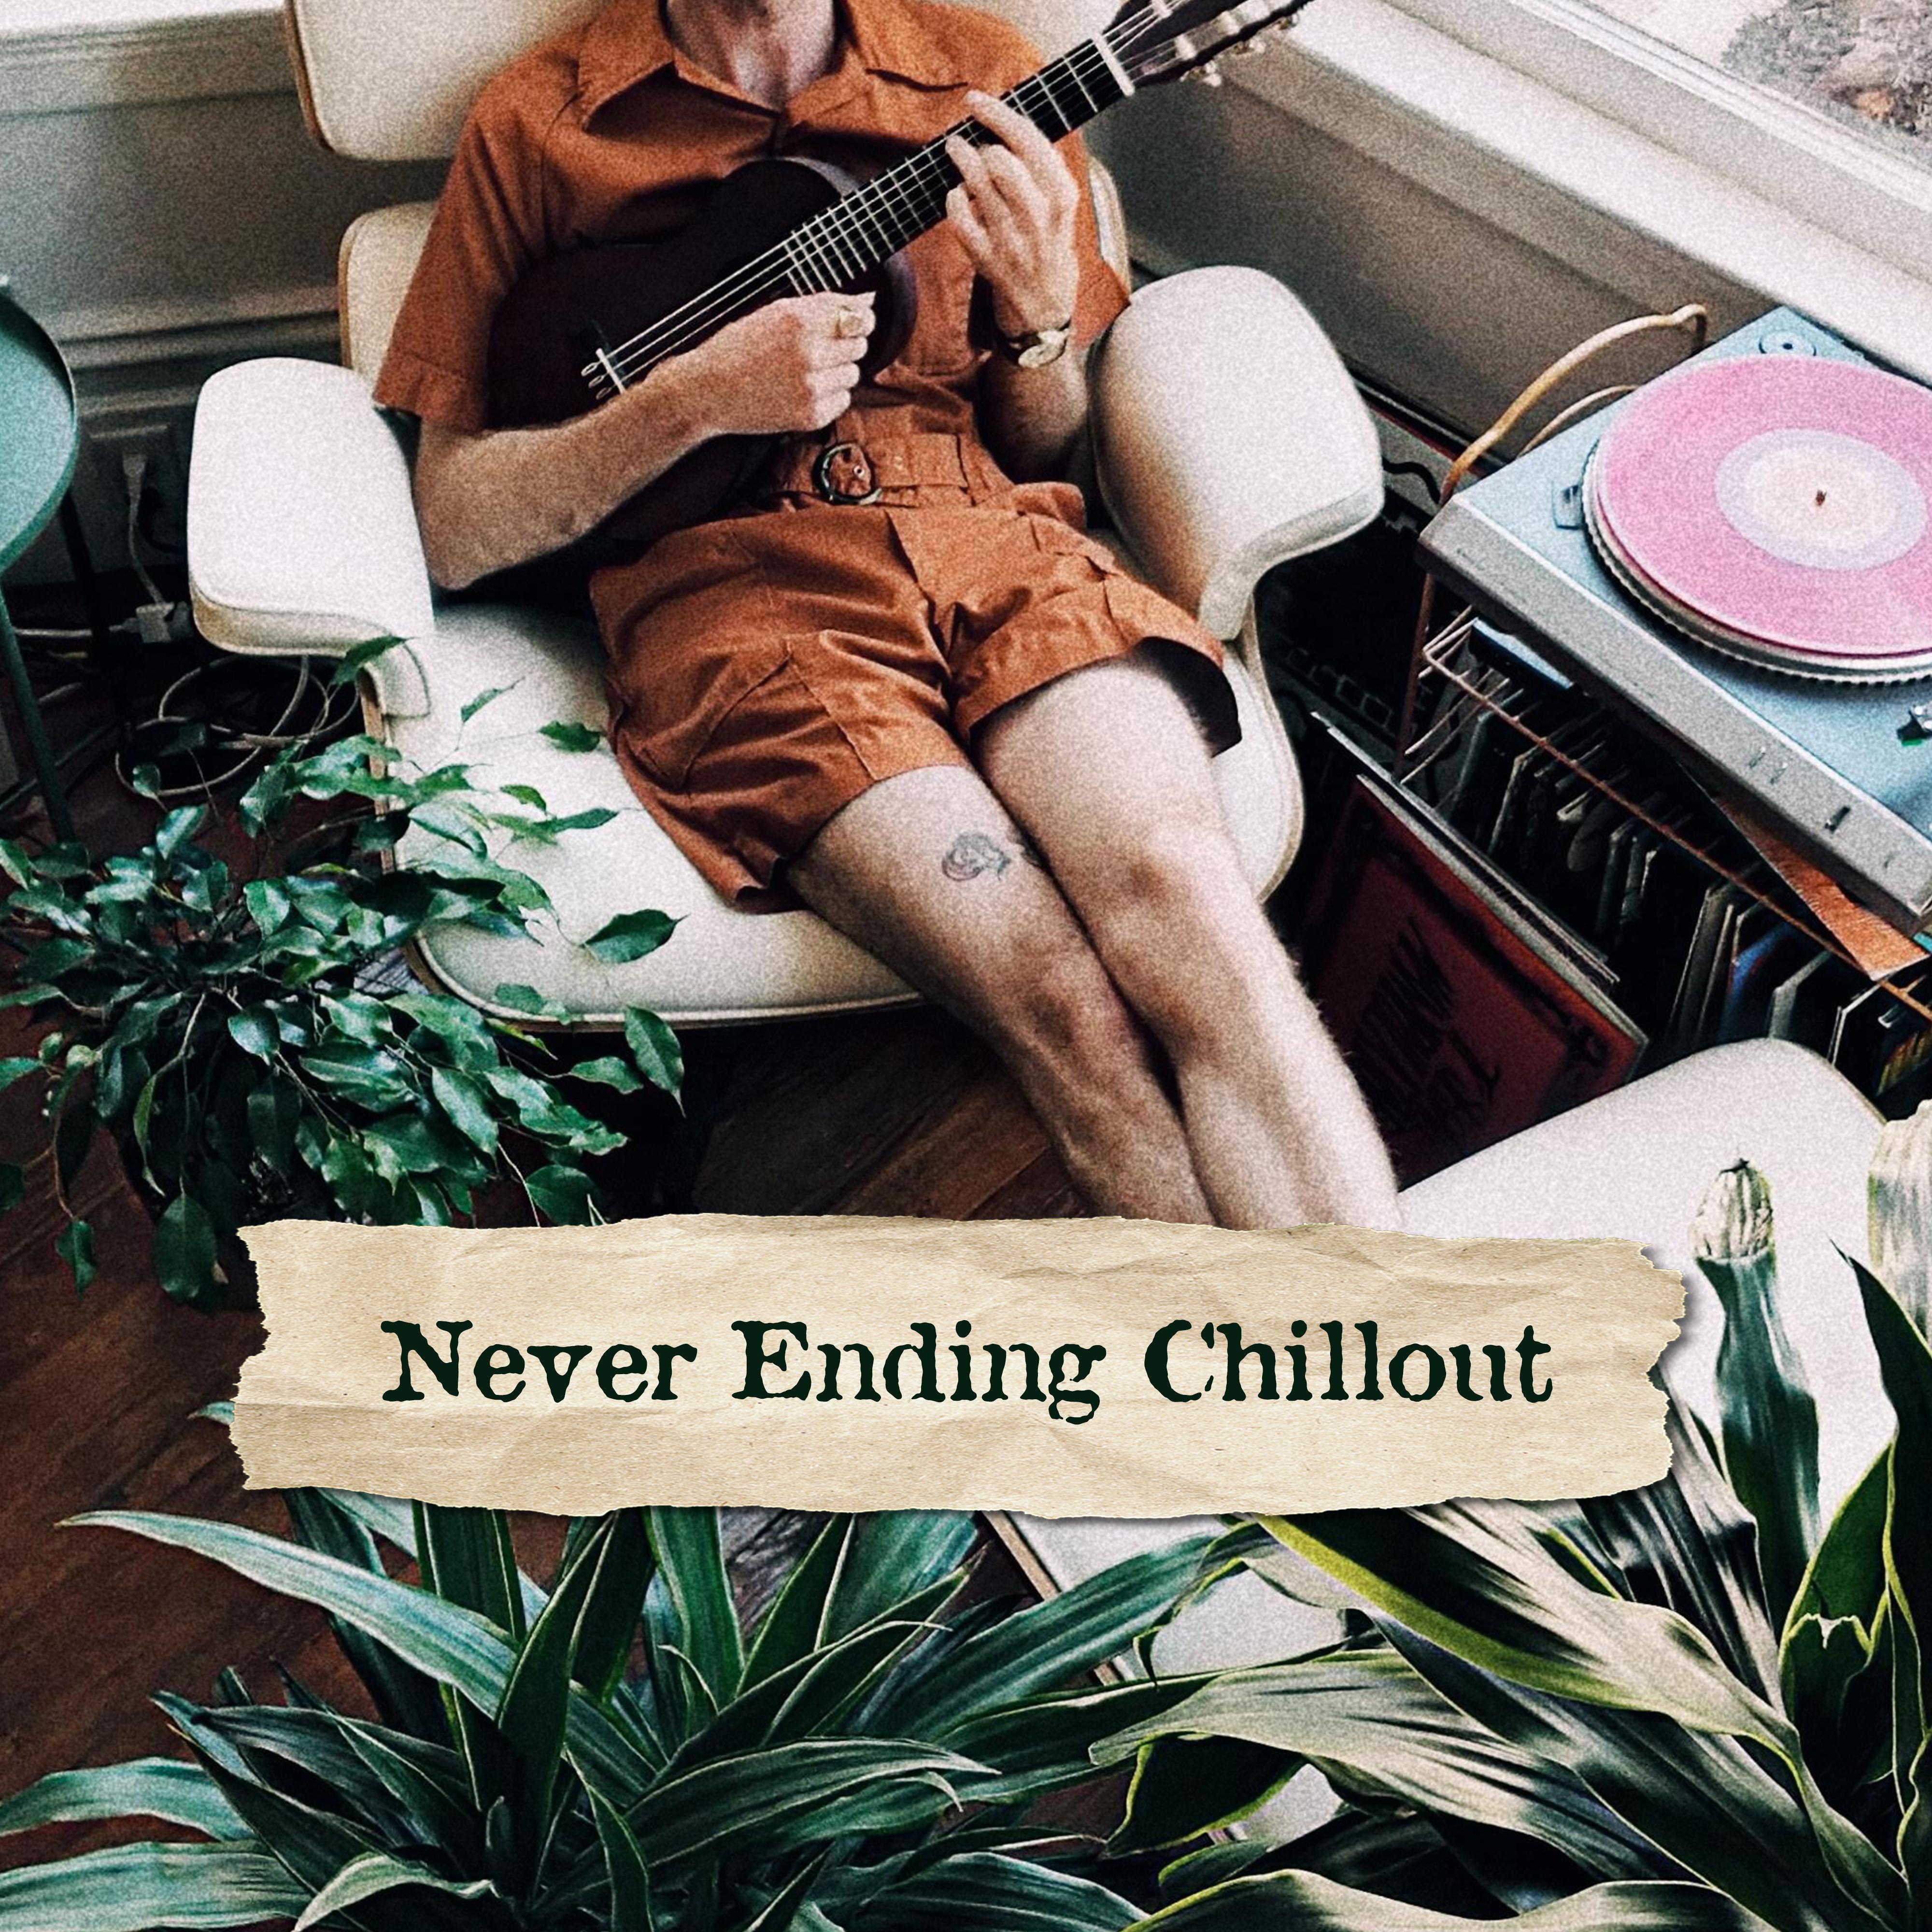 Never Ending Chillout: Greatest Chillout Music to Rest, Chill Out and Respite